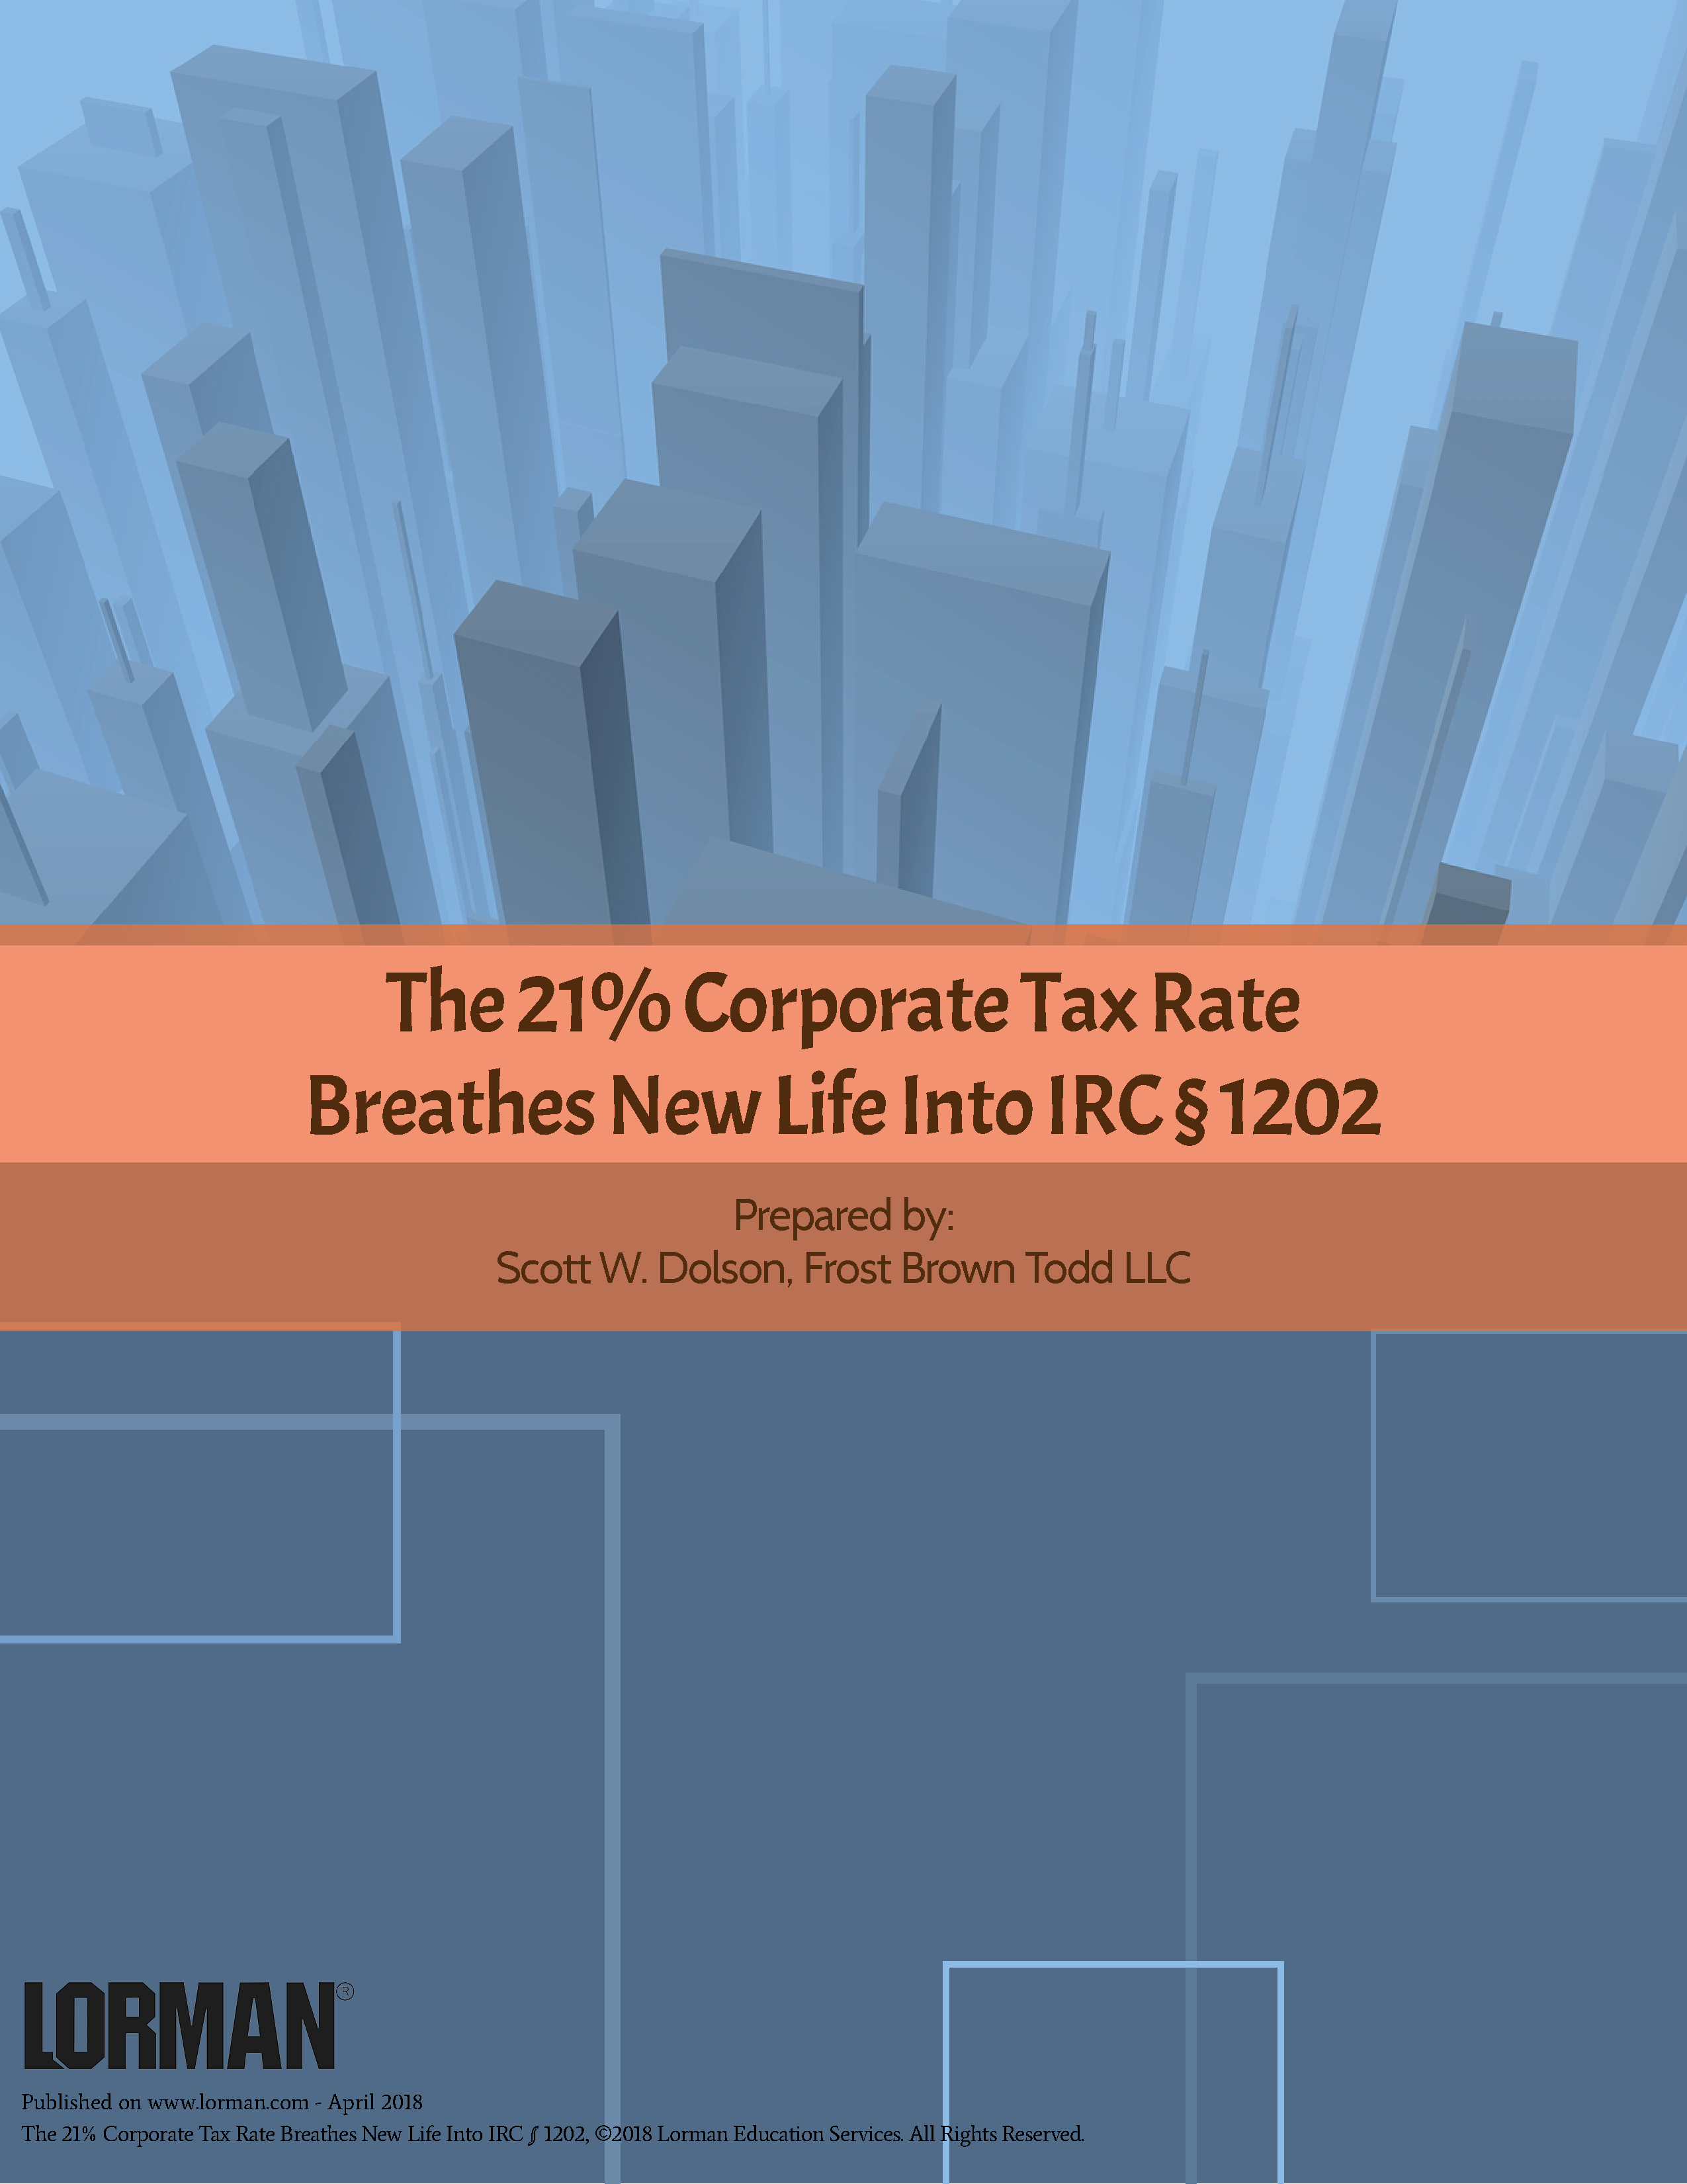 The 21% Corporate Tax Rate Breathes New Life Into IRC § 1202